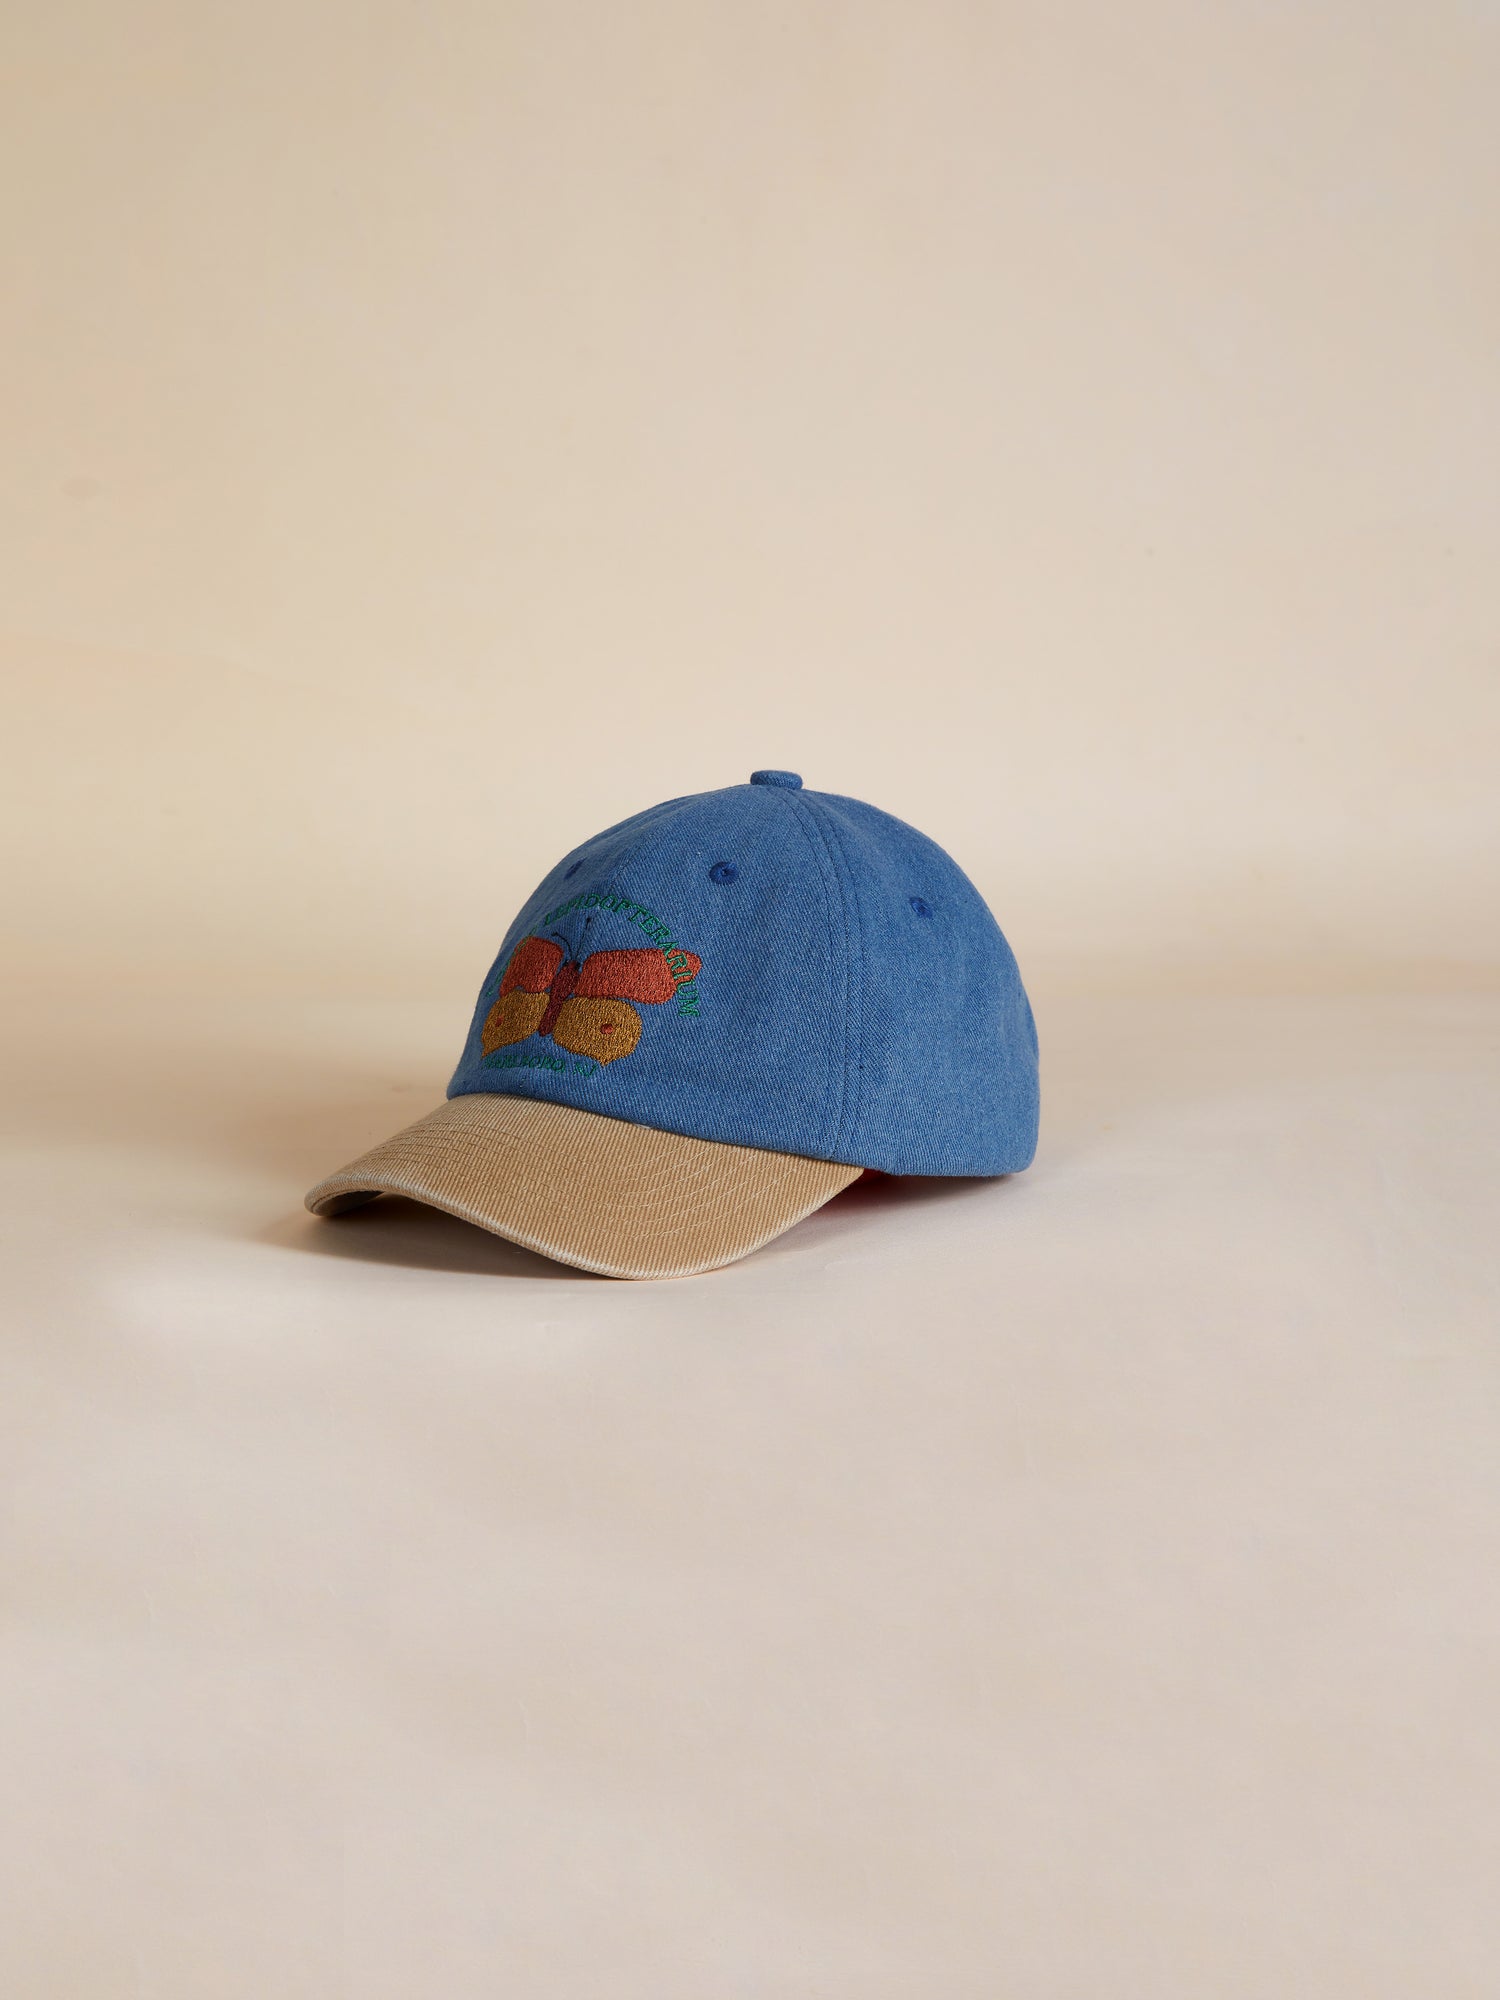 A blue and tan Butterfly House Denim Cap with an embroidered bird on it, by Found.